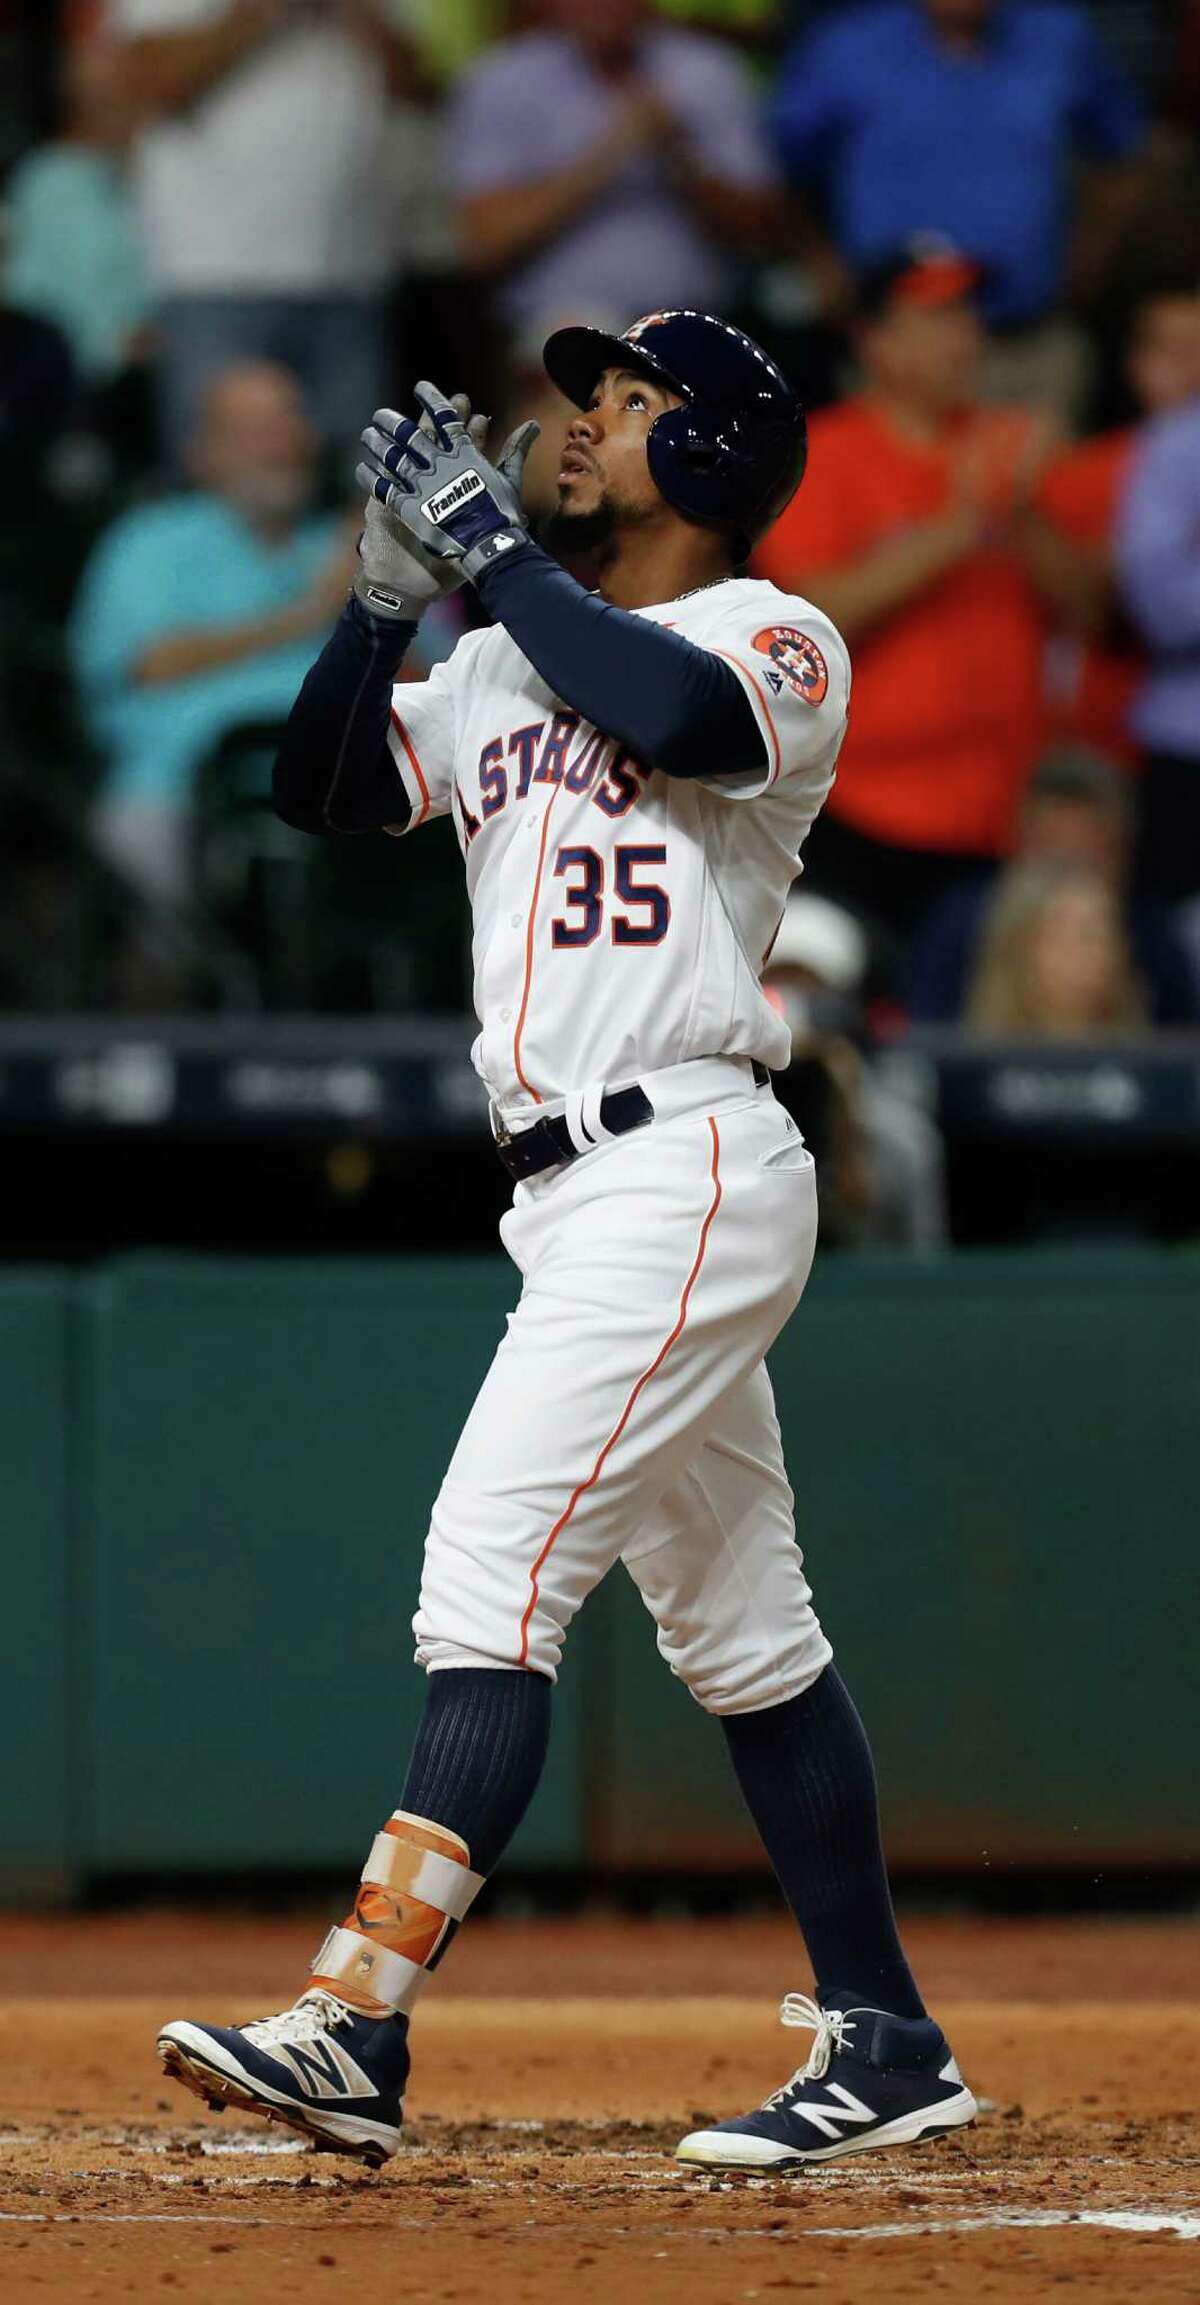 Houston Astros center fielder Teoscar Hernandez (35) reacts after hitting a two-run home run during the second inning of an MLB game at Minute Maid Park, Wednesday, Sept. 14, 2016 in Houston.